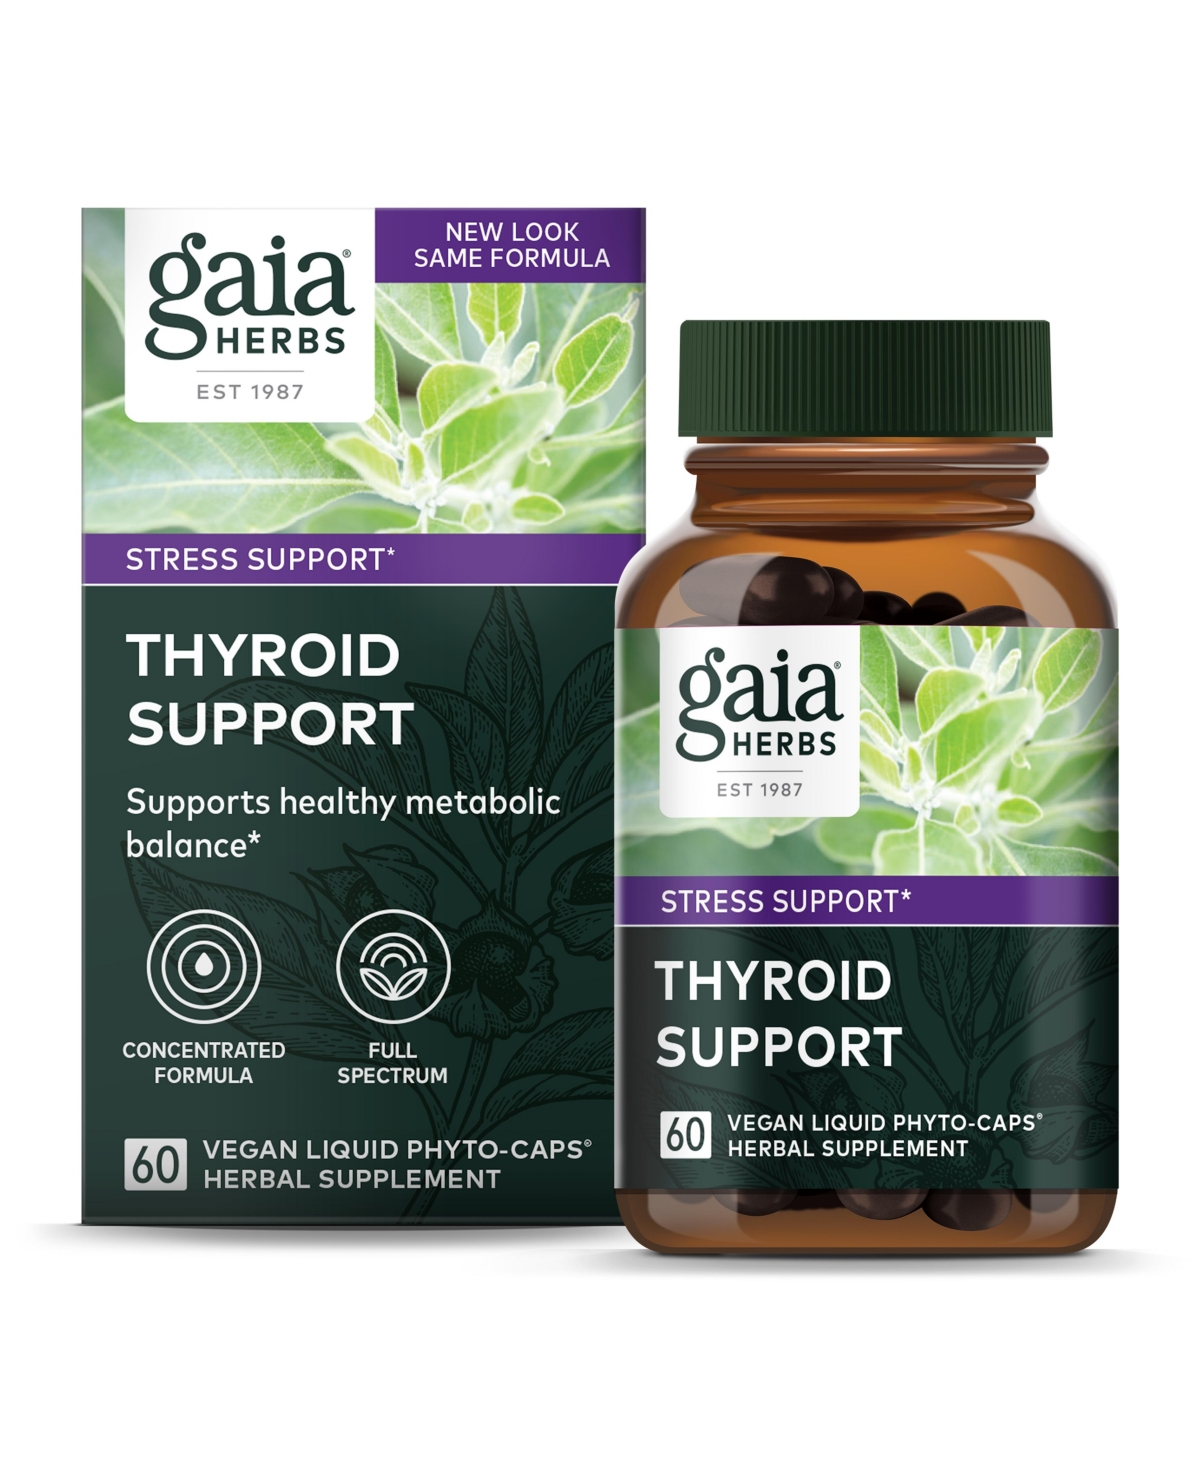 Thyroid Support - Made with Ashwagandha, Kelp, Brown Seaweed, and Schisandra to Support Healthy Metabolic Balance and Overall Well-Being -